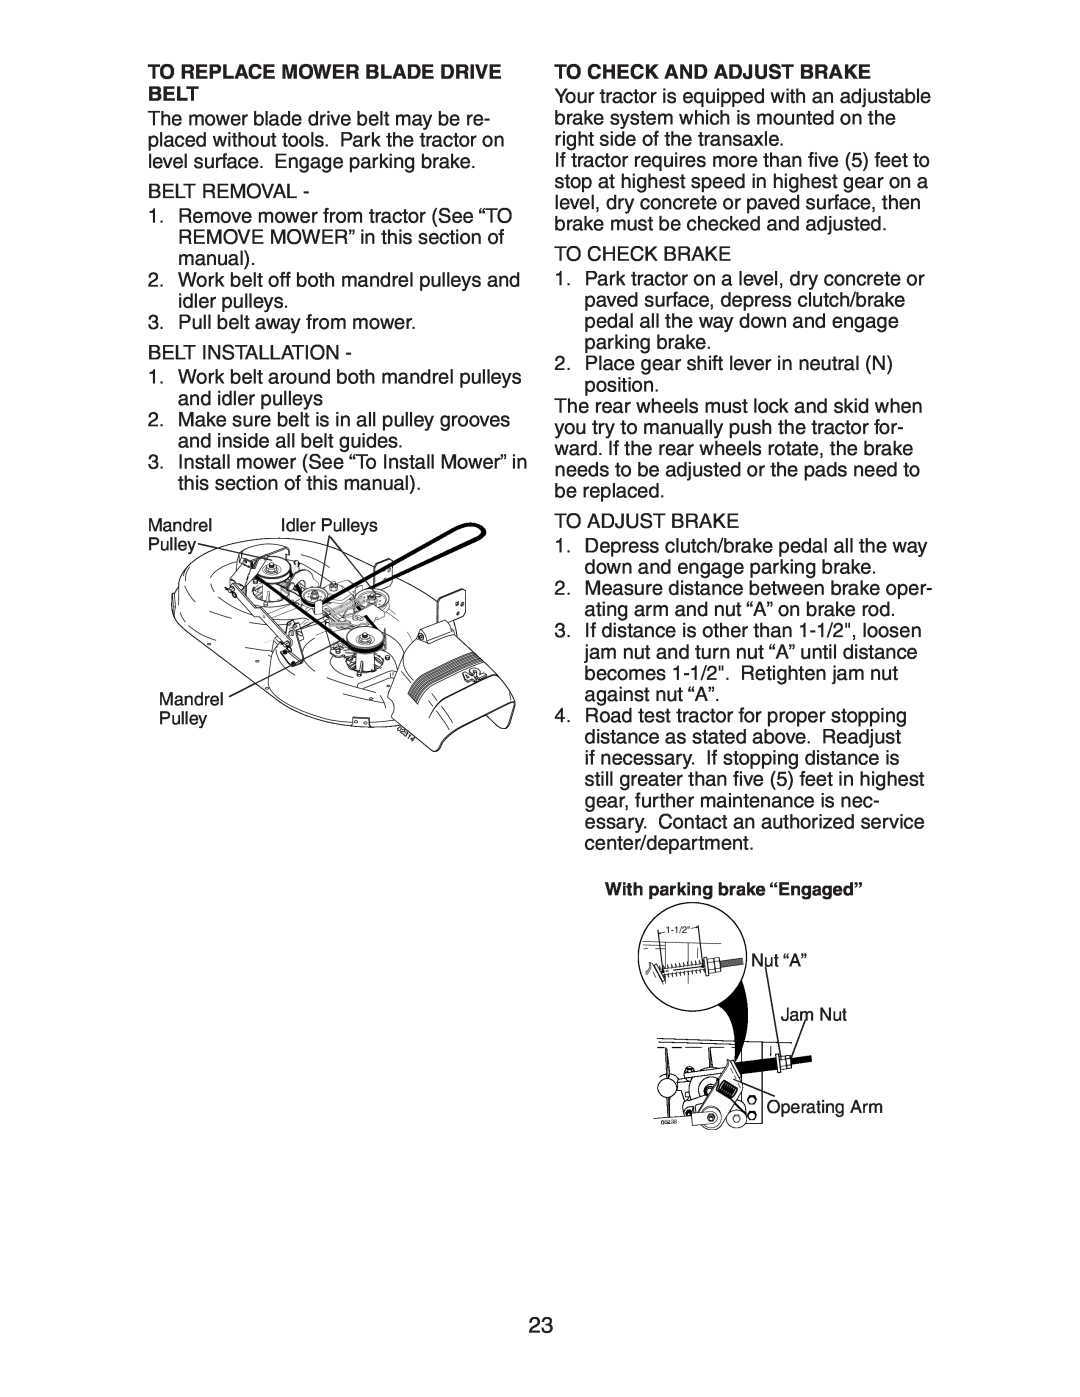 Poulan AG17542STB manual To Replace Mower Blade Drive Belt, To Check And Adjust Brake, With parking brake “Engaged” 